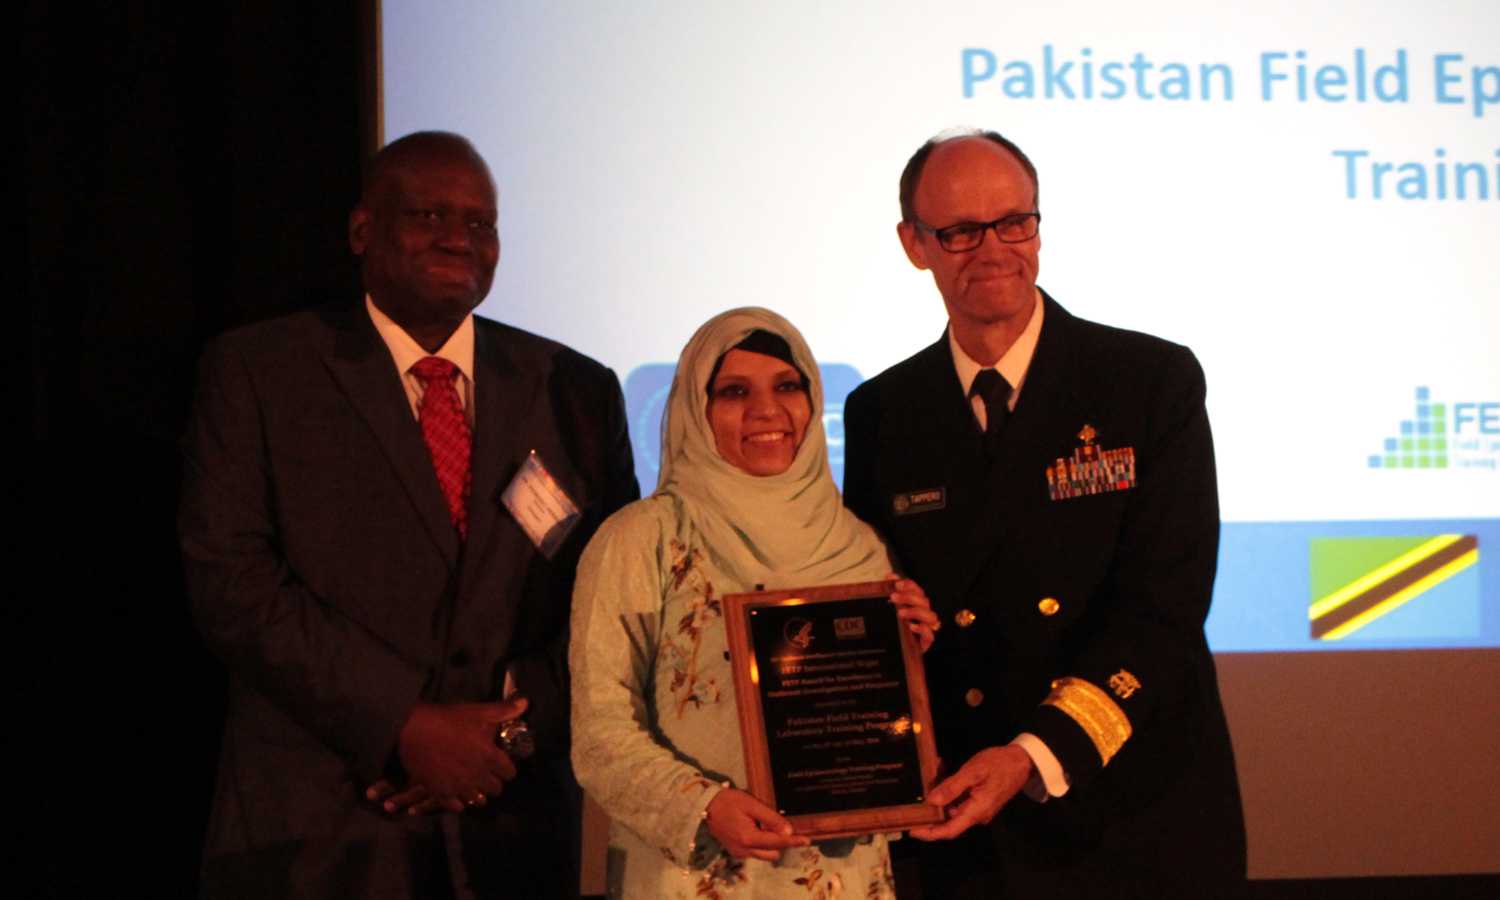 	Pakistan FELTP wins the CDC Directors Award for Excellence in Epidemiology and Public Health Response at the 2016 EIS Conference in Atlanta.